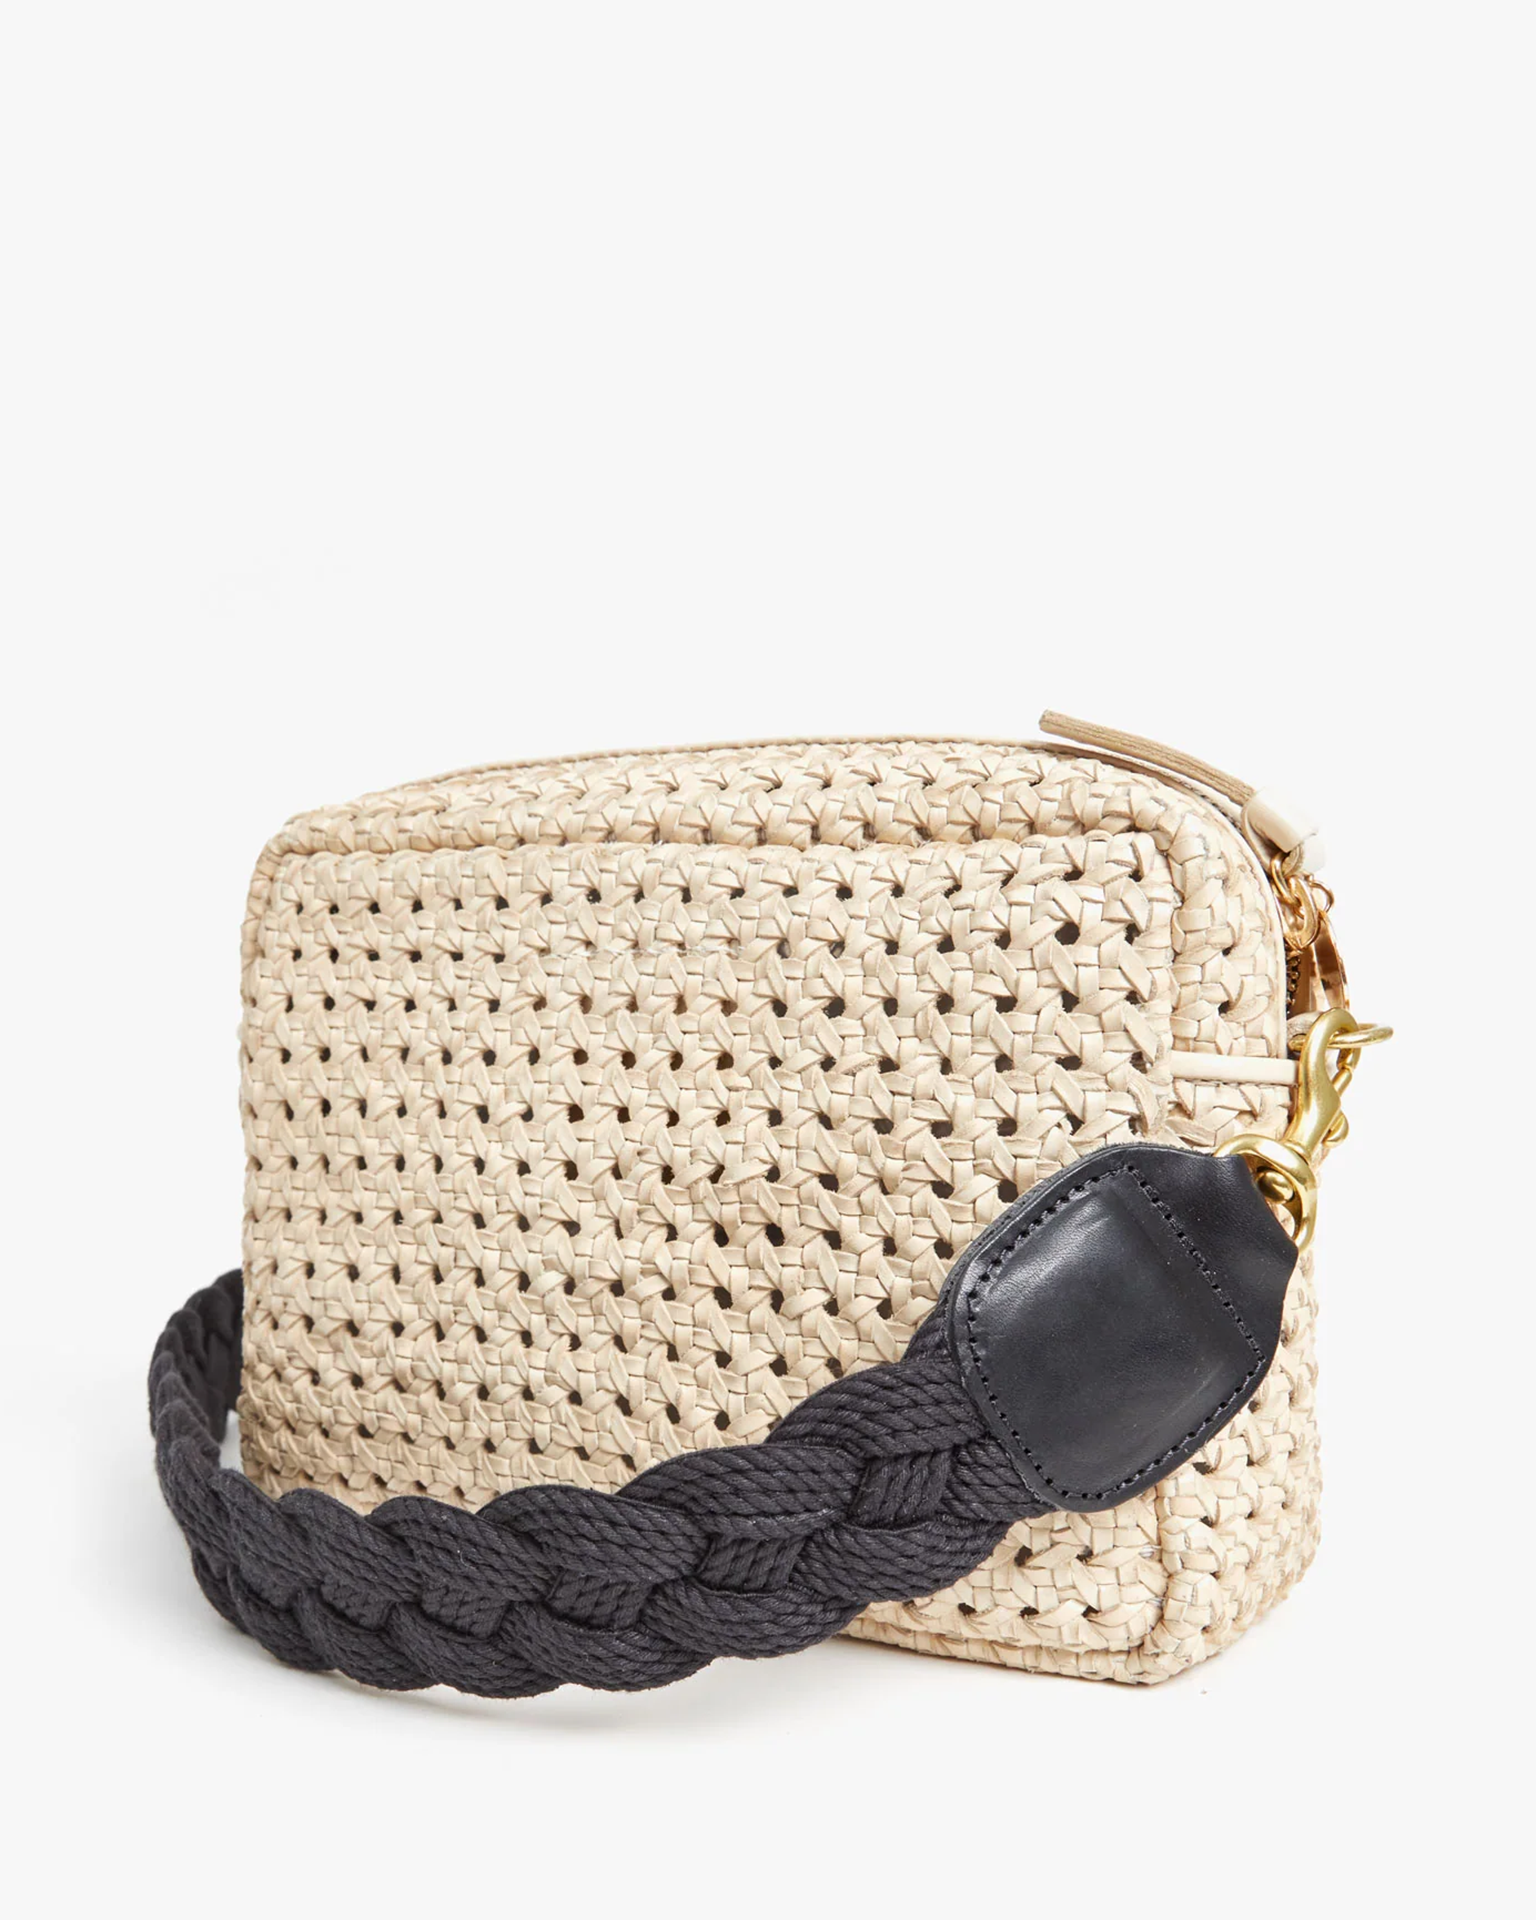 Clare V. Braided Rope Crossbody Strap in Black - Bliss Boutiques